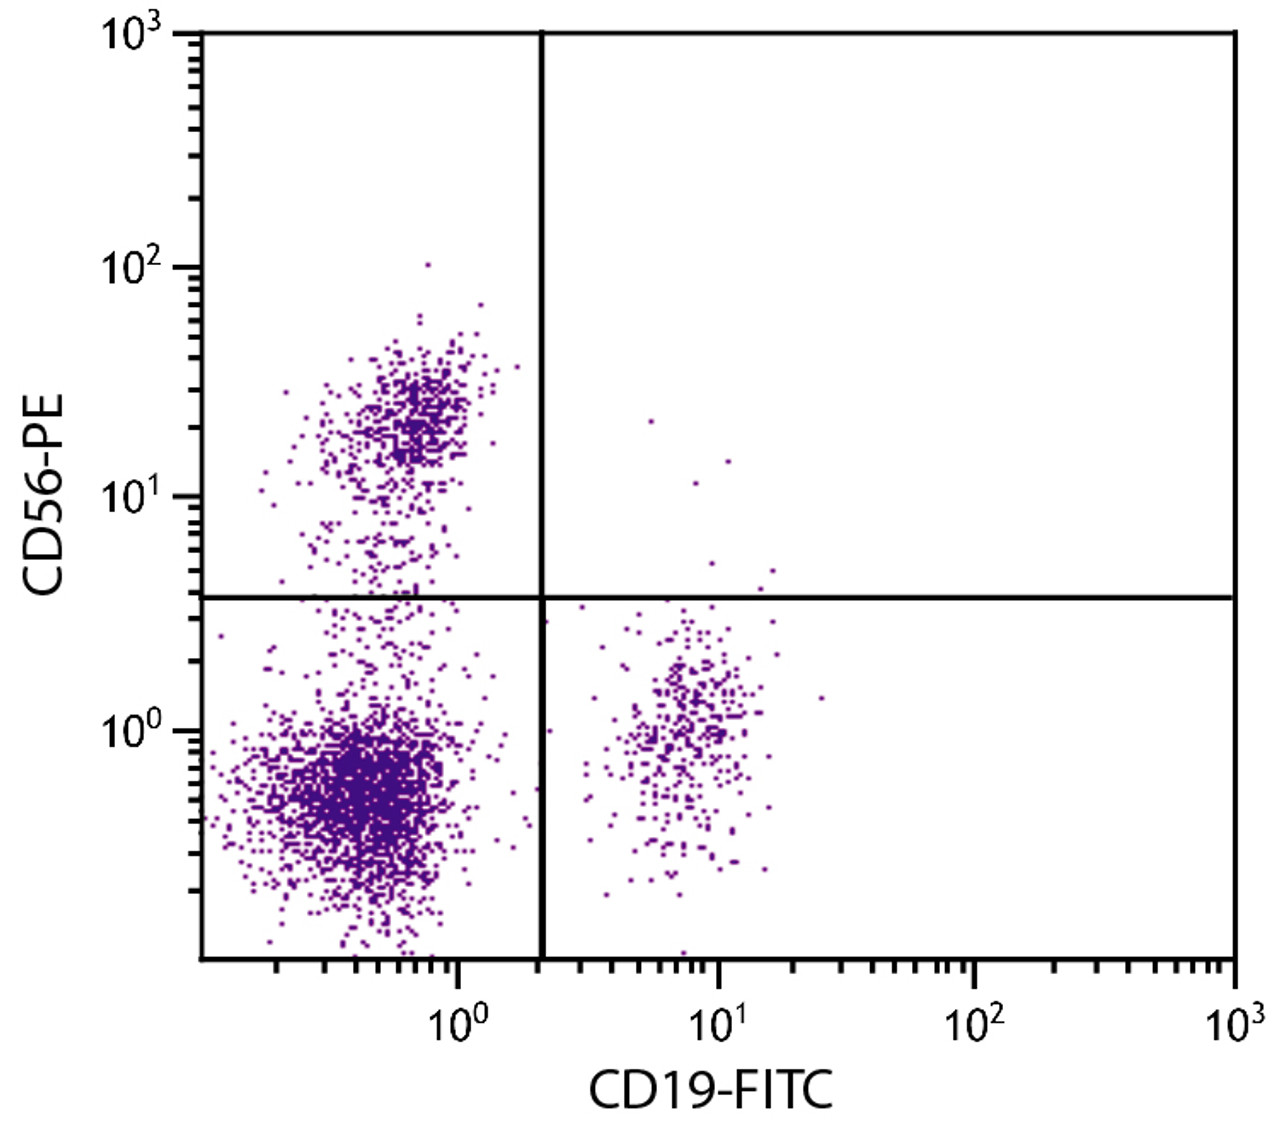 Human peripheral blood lymphocytes were stained with Mouse Anti-Human CD56-PE (Cat. No. 99-396) and Mouse Anti-Human CD19-FITC .